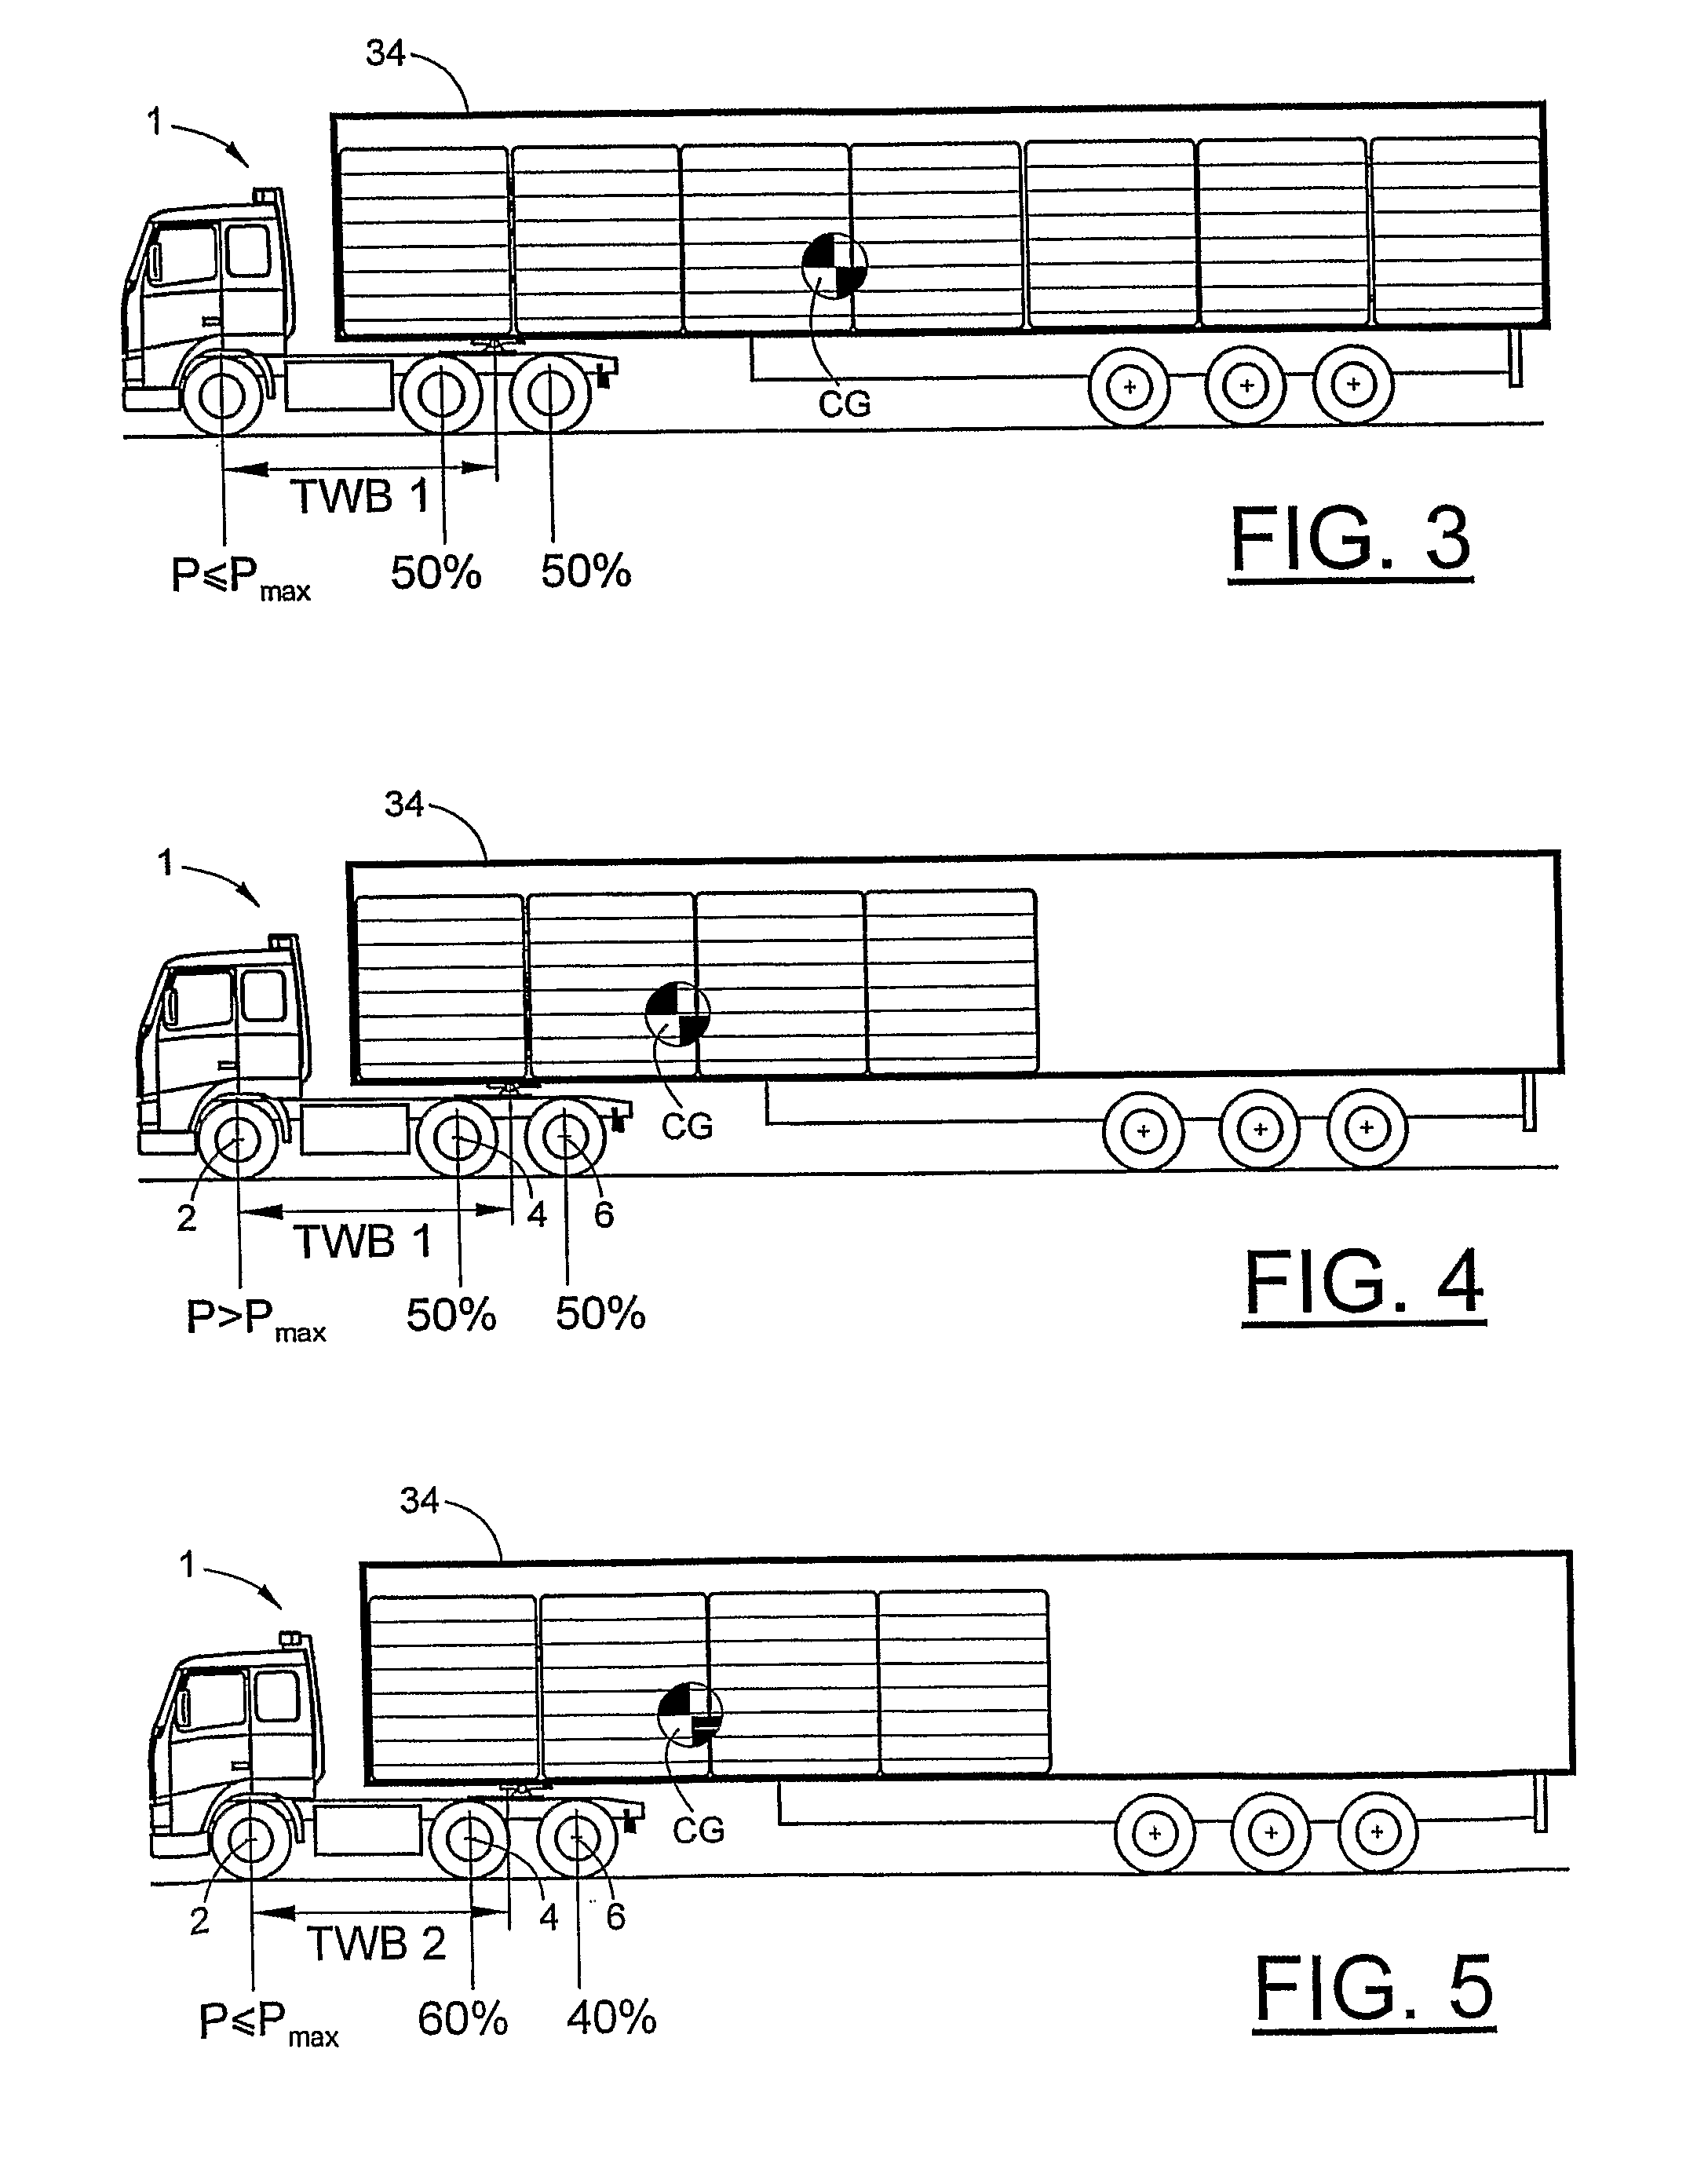 Axle load control system and a wheel base adjustment system